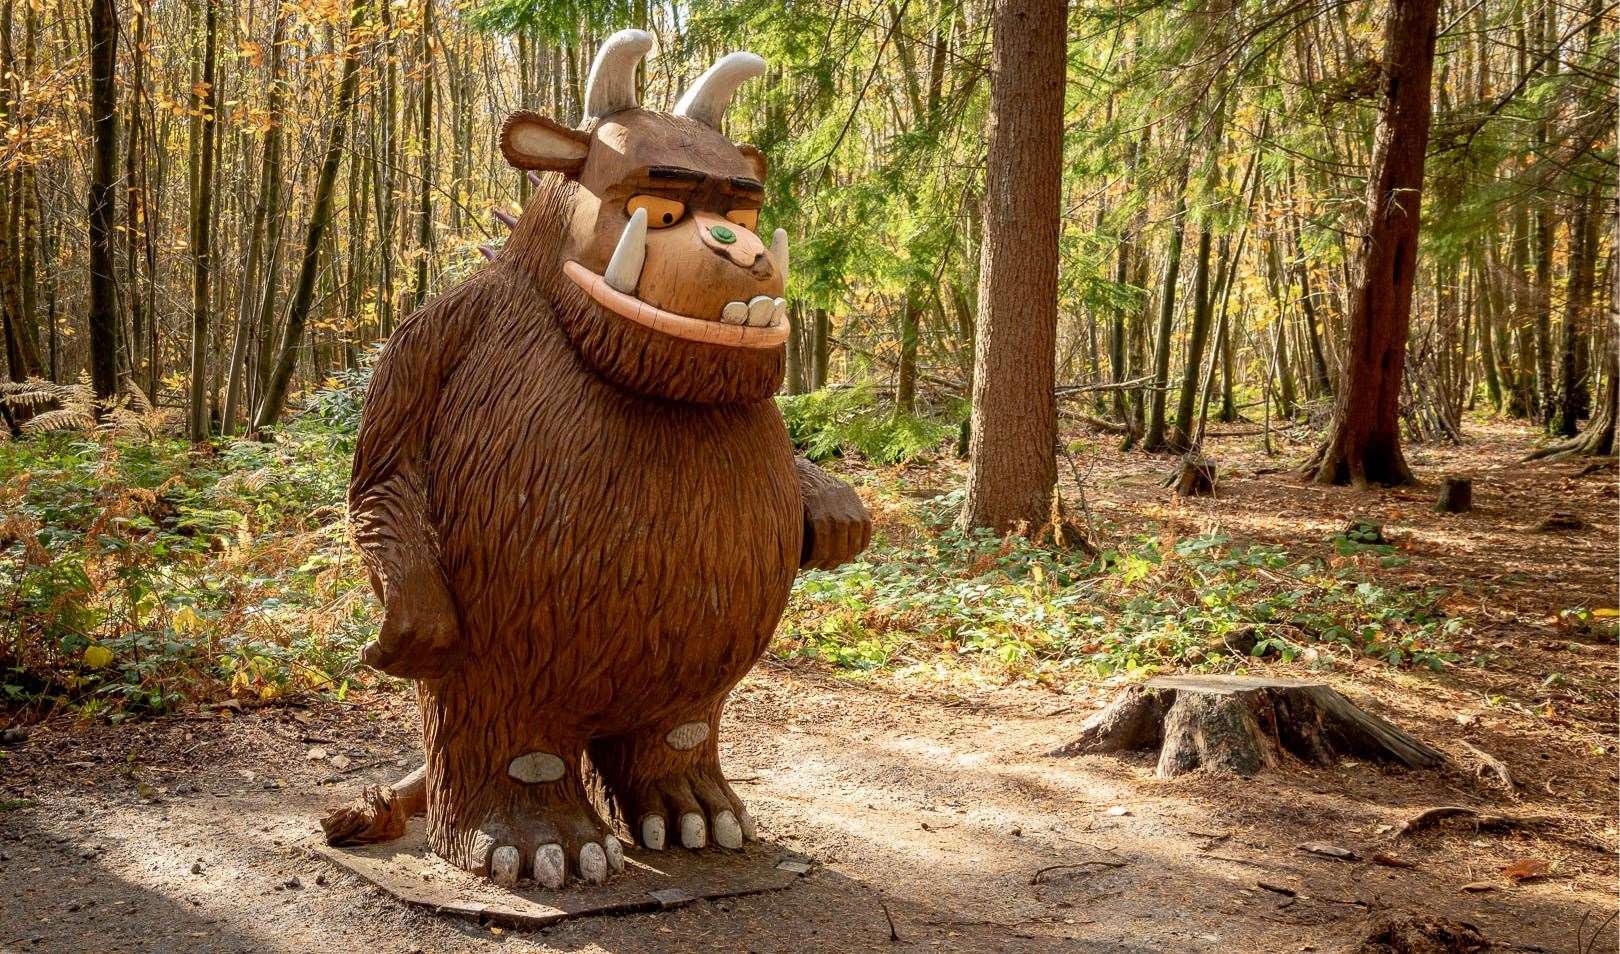 The Gruffalo trail at Bedgebury is getting an Olympic-themed twist for the summer. Picture: Forestry England